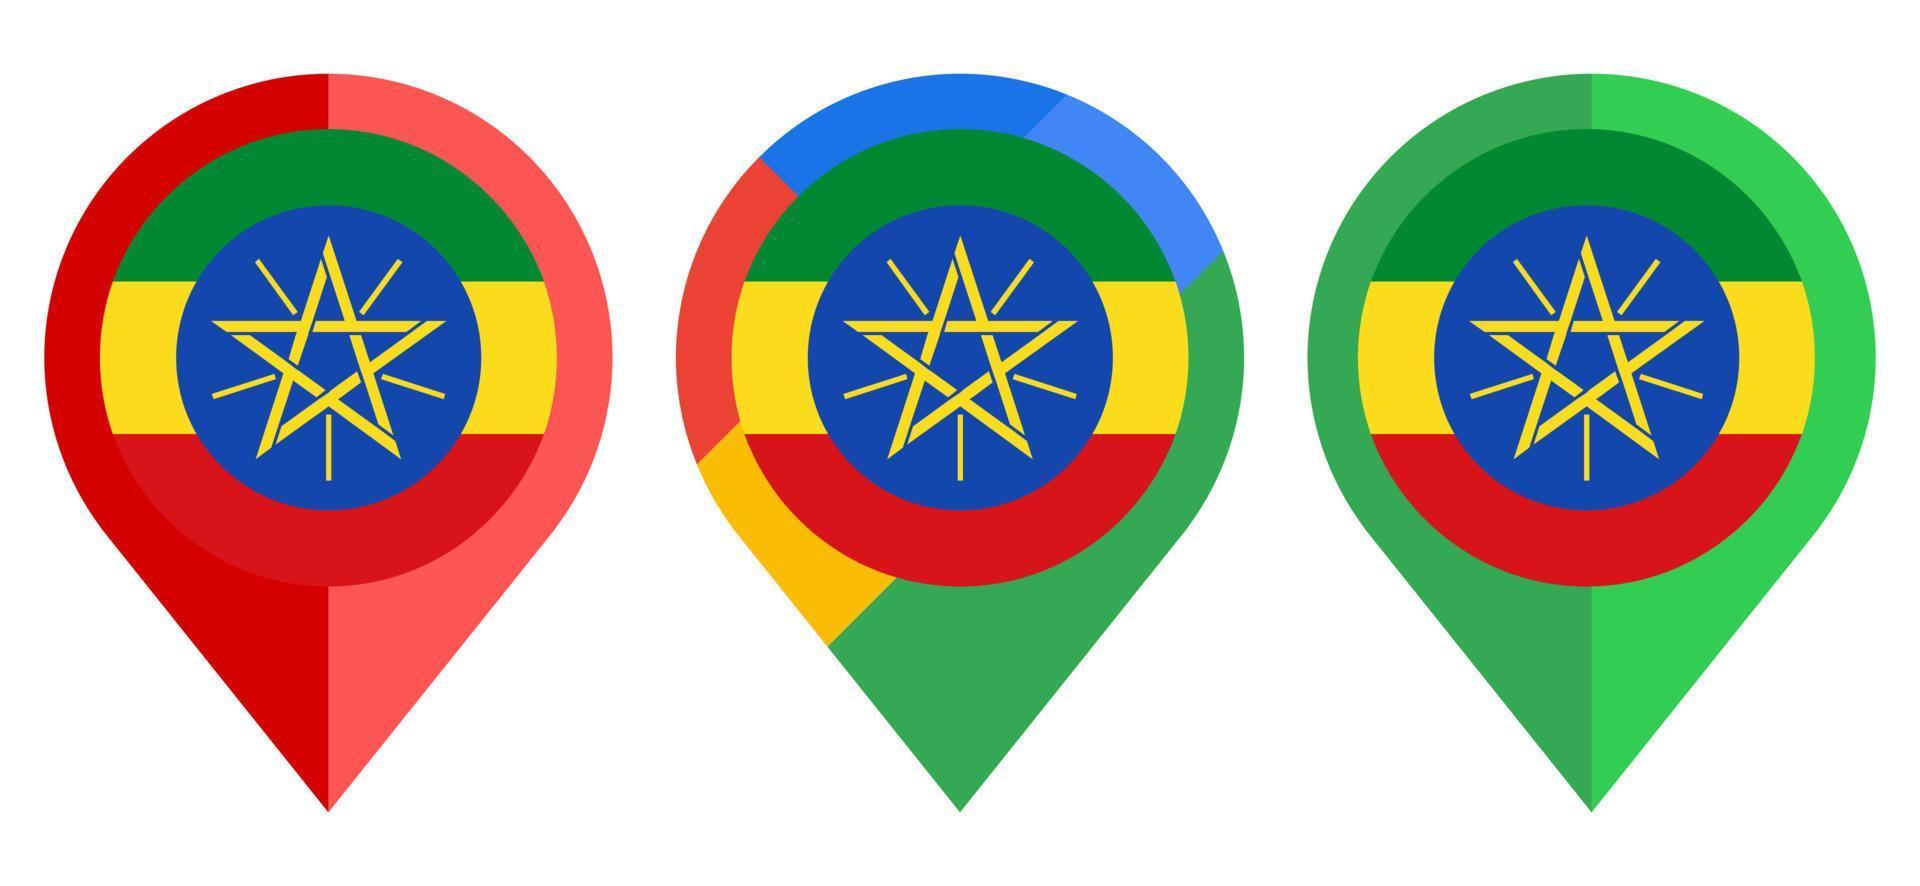 flat map marker icon with ethiopia flag isolated on white background vector